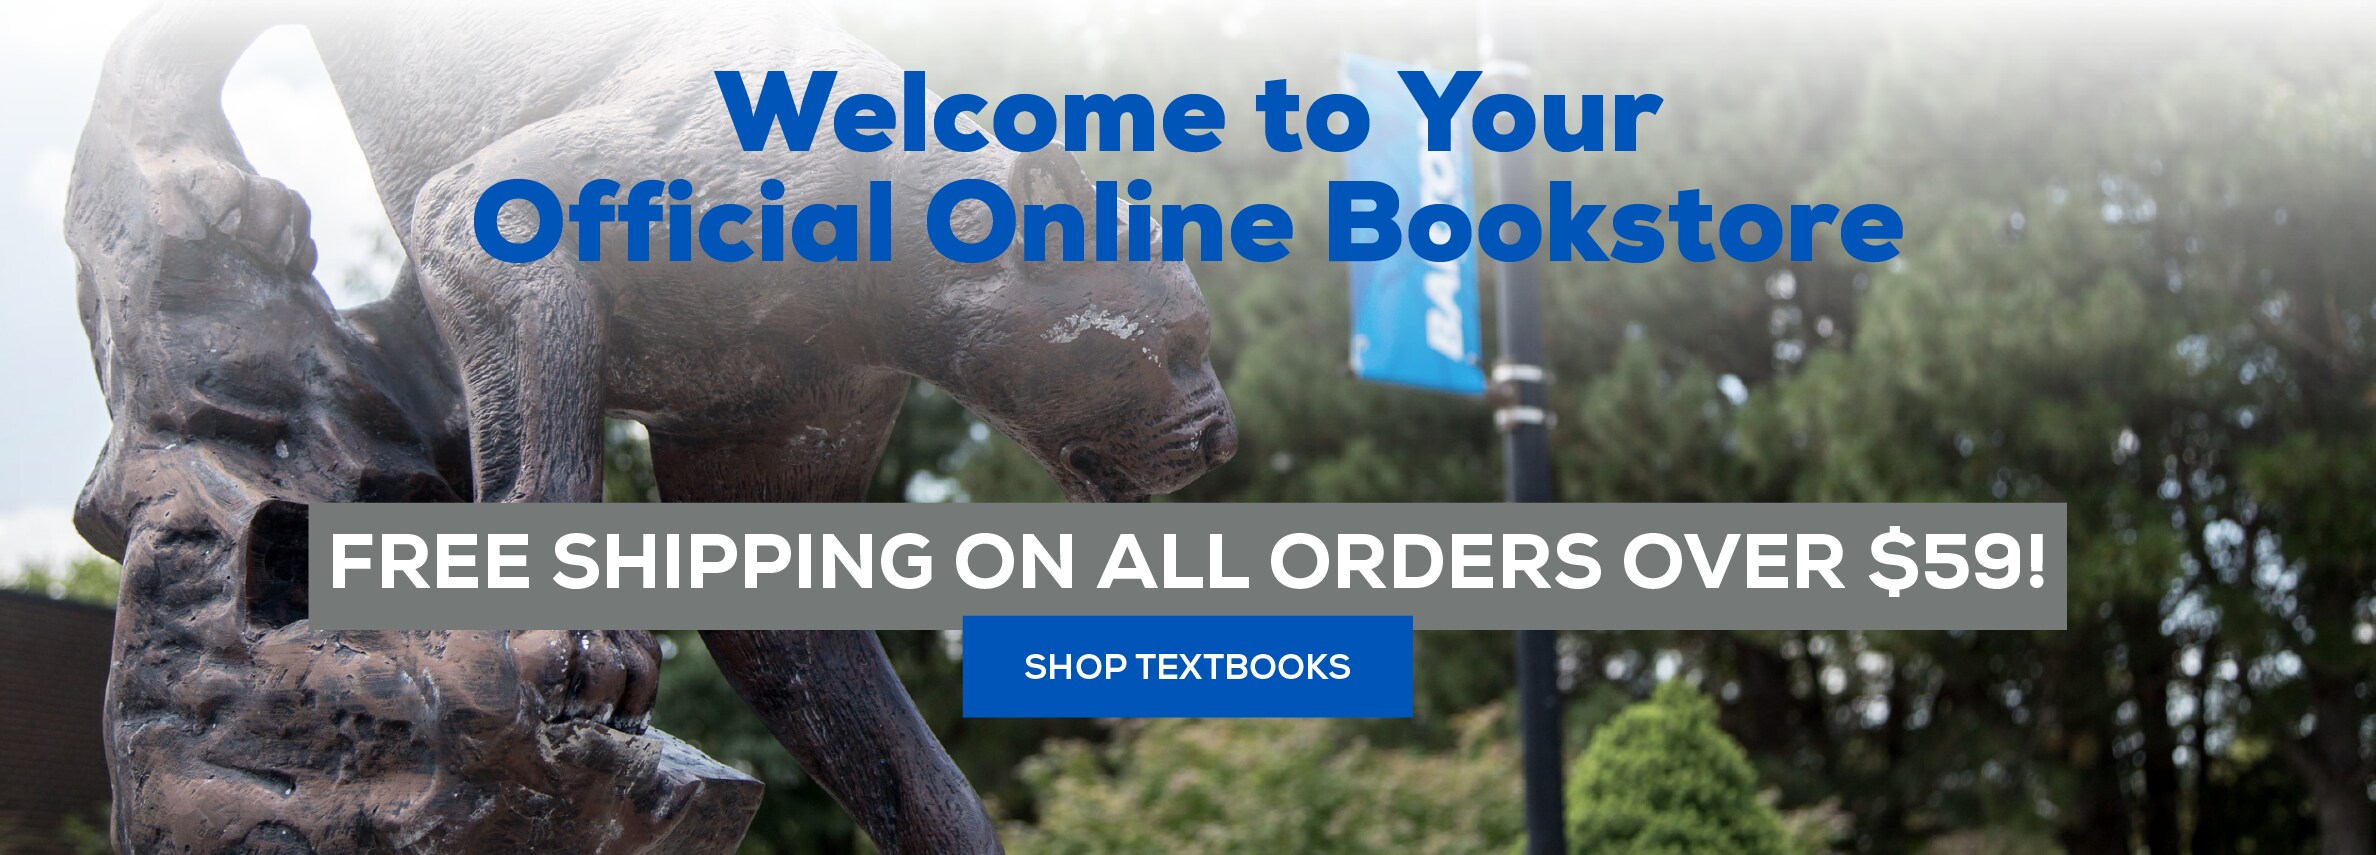 Welcome to your official online bookstore. Free shipping on all orders over $59! Shop Textbooks